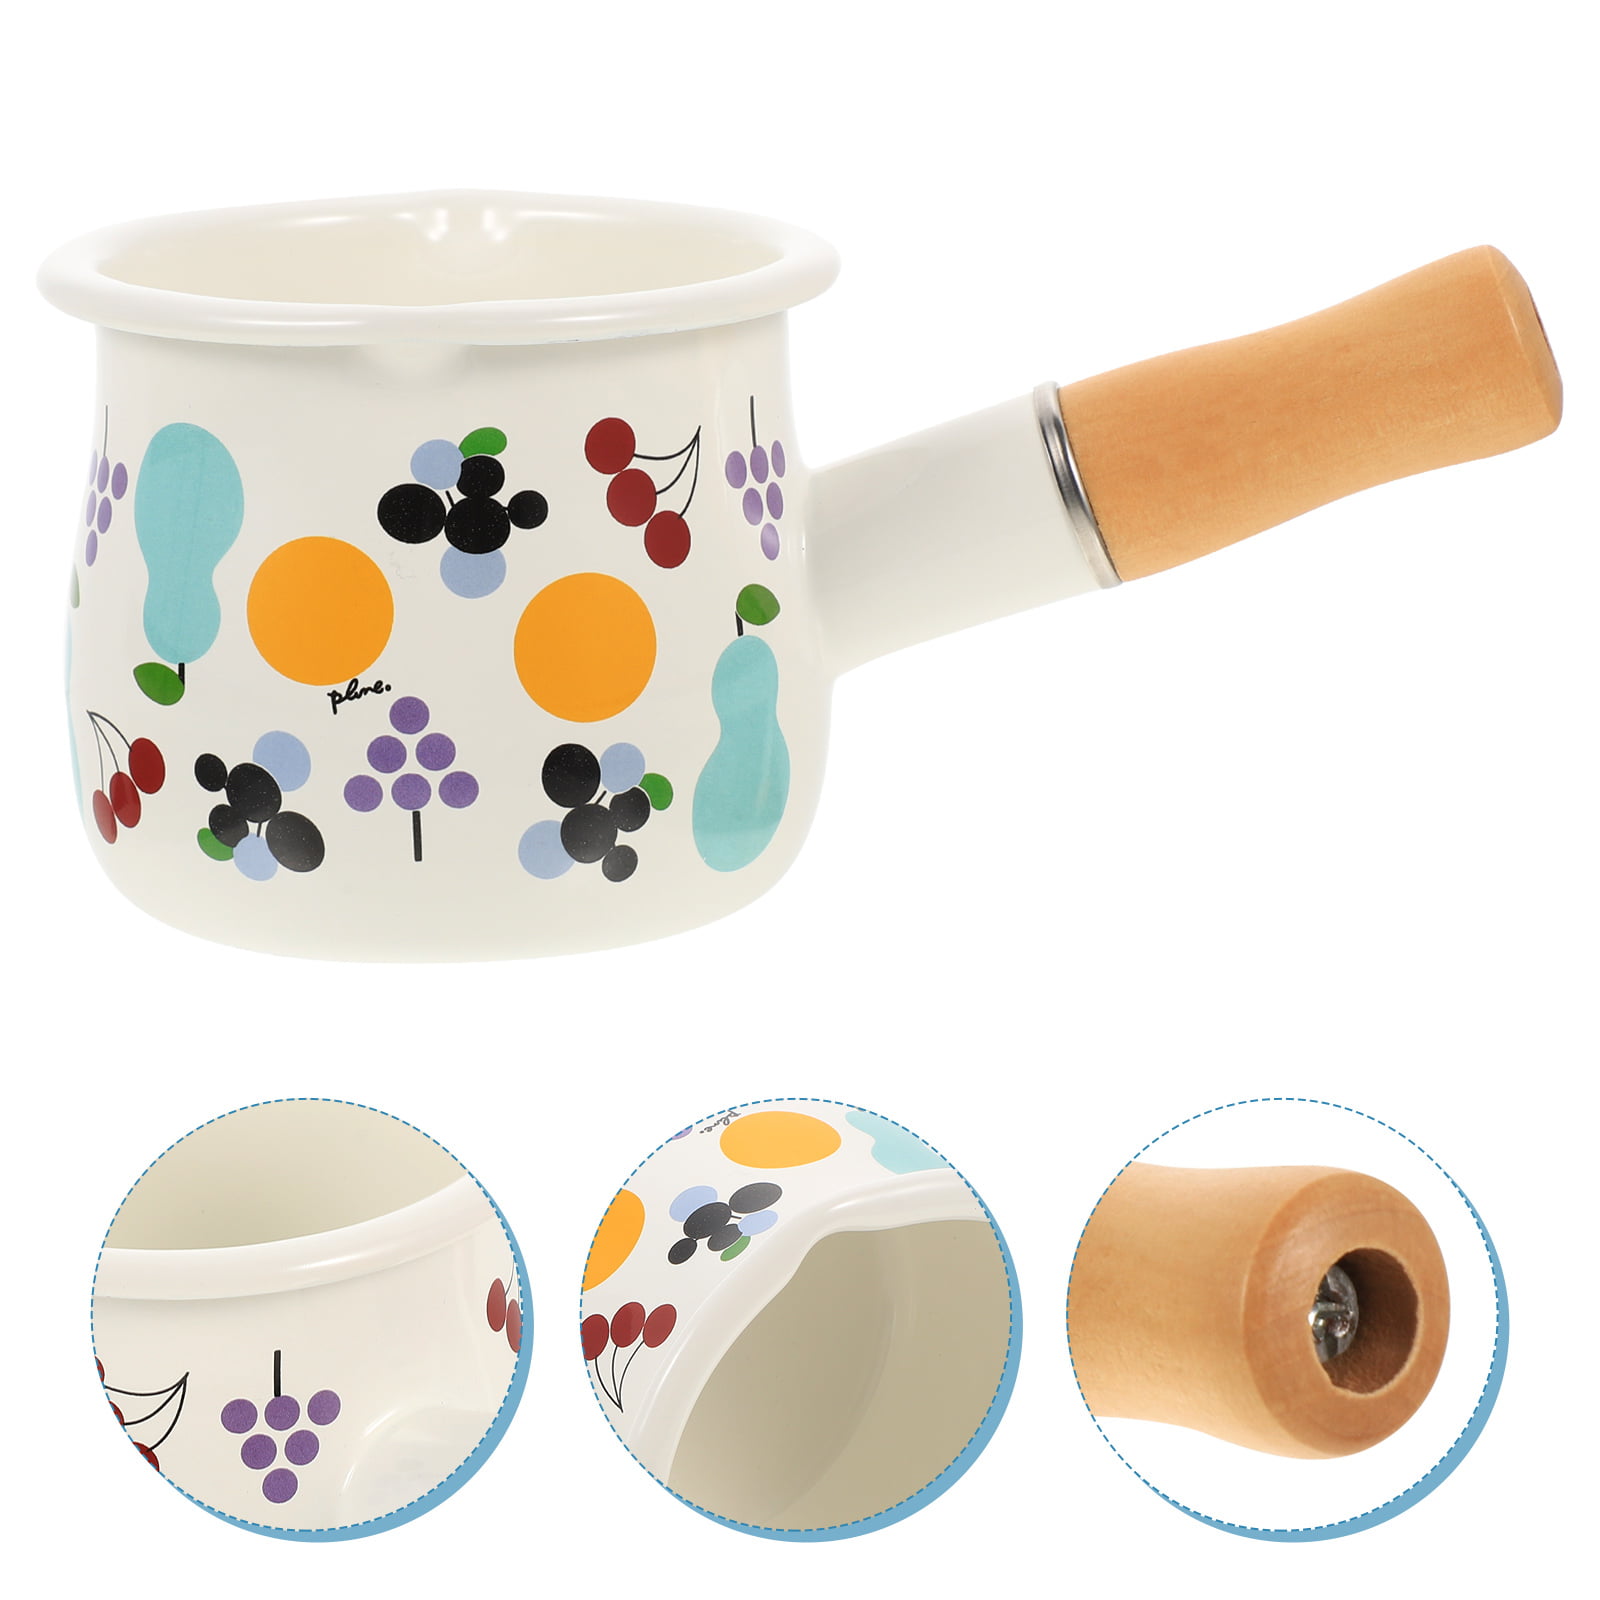 YumCute Home Enamel Milk Pan with Dual Pour Spout Butter Warmer Milk Pot  for Stove Top Healthy White Enameled Inside Coating Iron 1QT Small Soup Pot